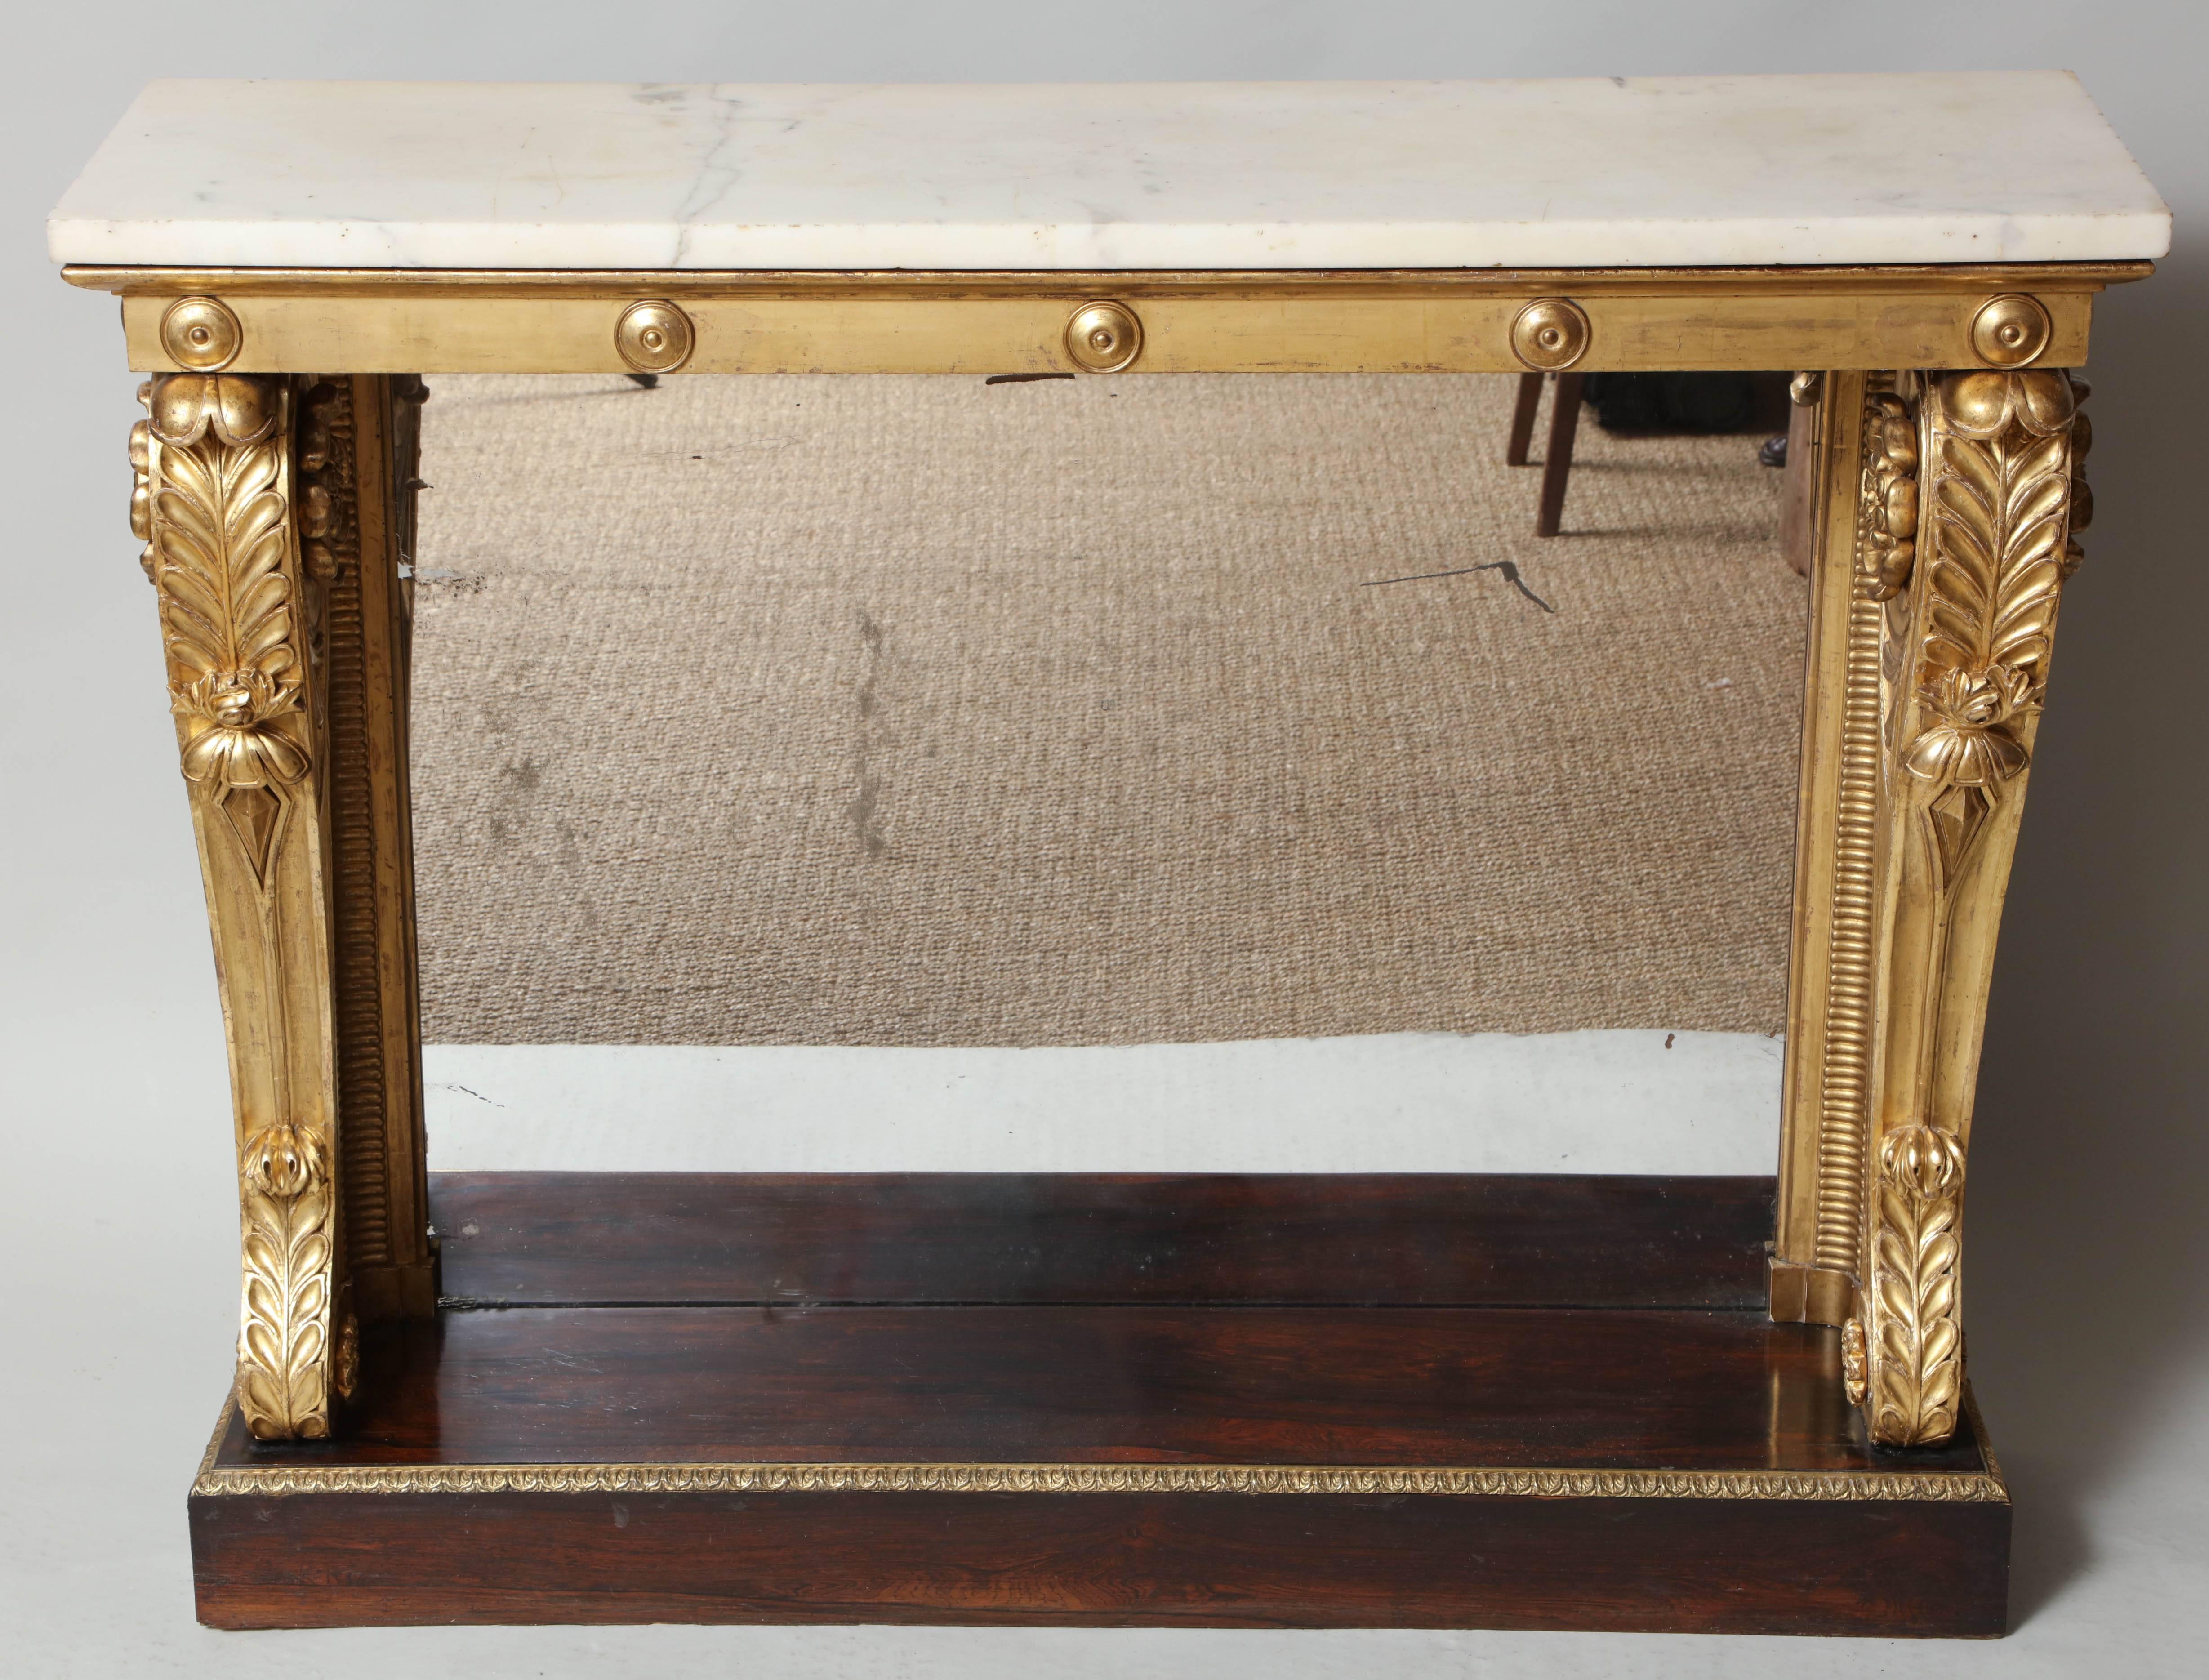 Very fine early 19th century pier table of useful narrow proportions, the original white marble top over giltwood apron with applied bosses, the bold scrolled legs with acanthus leaf and rosette motifs standing on rich rosewood plinth with gilt